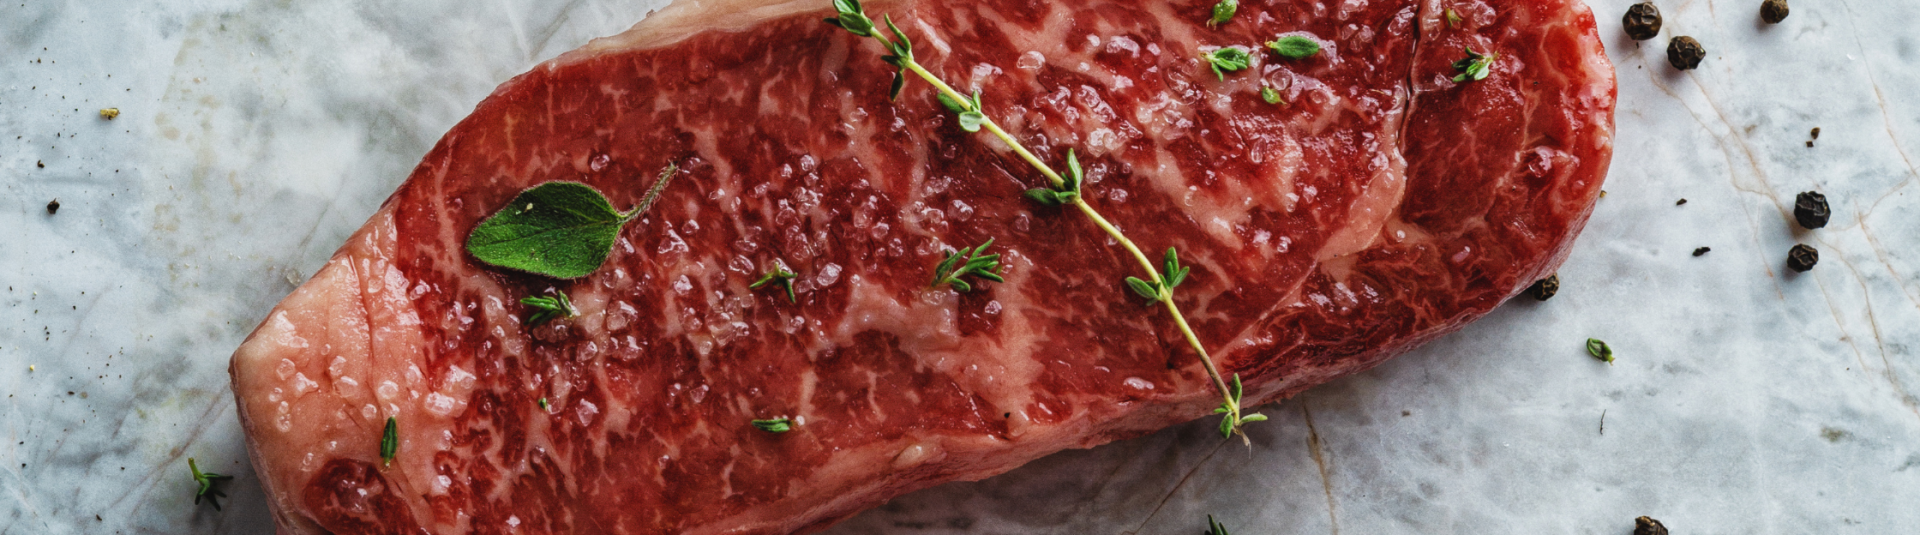 Understanding Cuts of Meat: A Guide for Business Owners